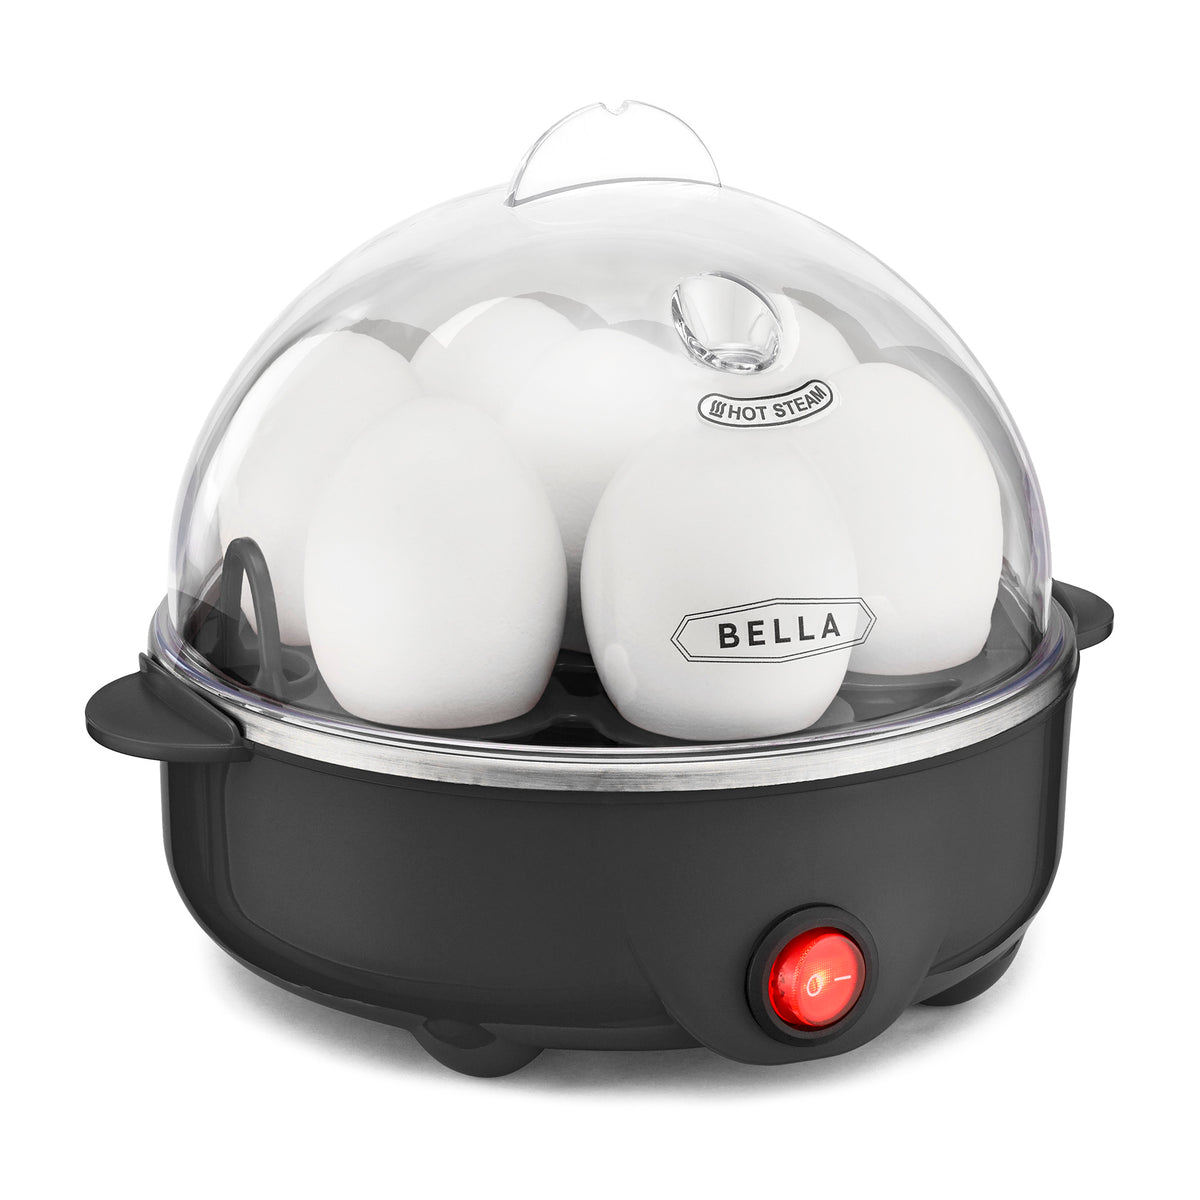 COOKOE Egg Cooker, Egg Cooker for Hard Boiled Eggs, Egg Boiler, Egg  Steamer, Hard Boiled Egg Cooker,Can Hold 7 Eggs,Can Be Timed,One-Button  Rotary